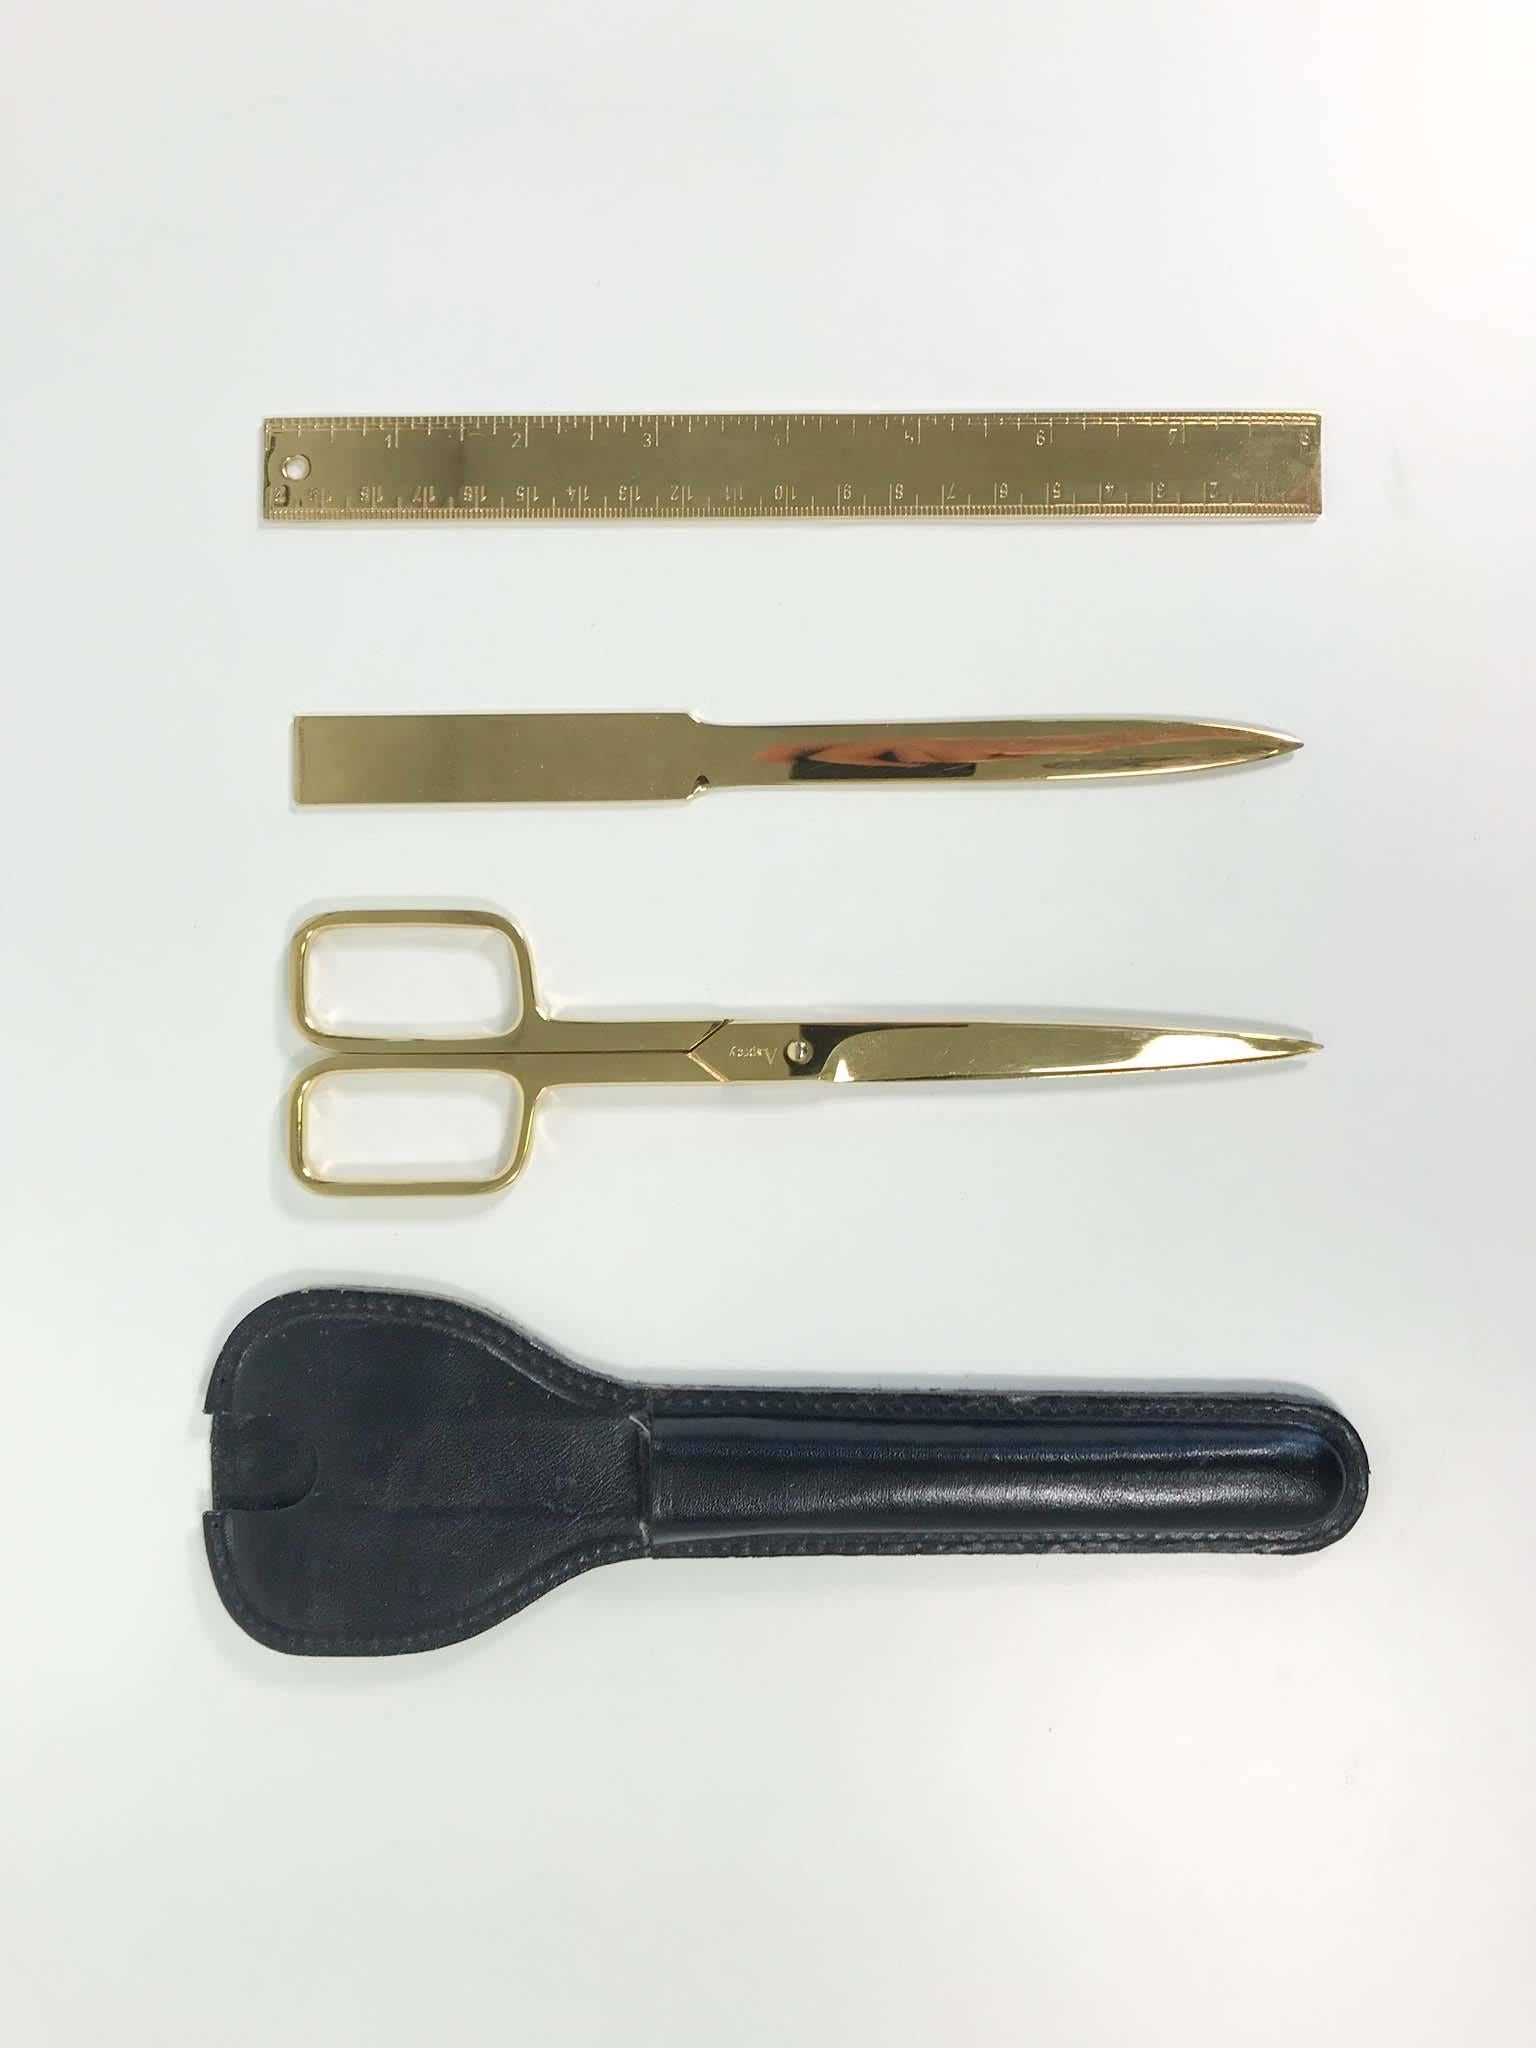 Gold-plated desk set by Asprey includes the following:

1 x Scissors
1 x Letter opener
1 x Ruler
1 x Leather case.

In excellent overall condition with minor wear consistent with regular use.